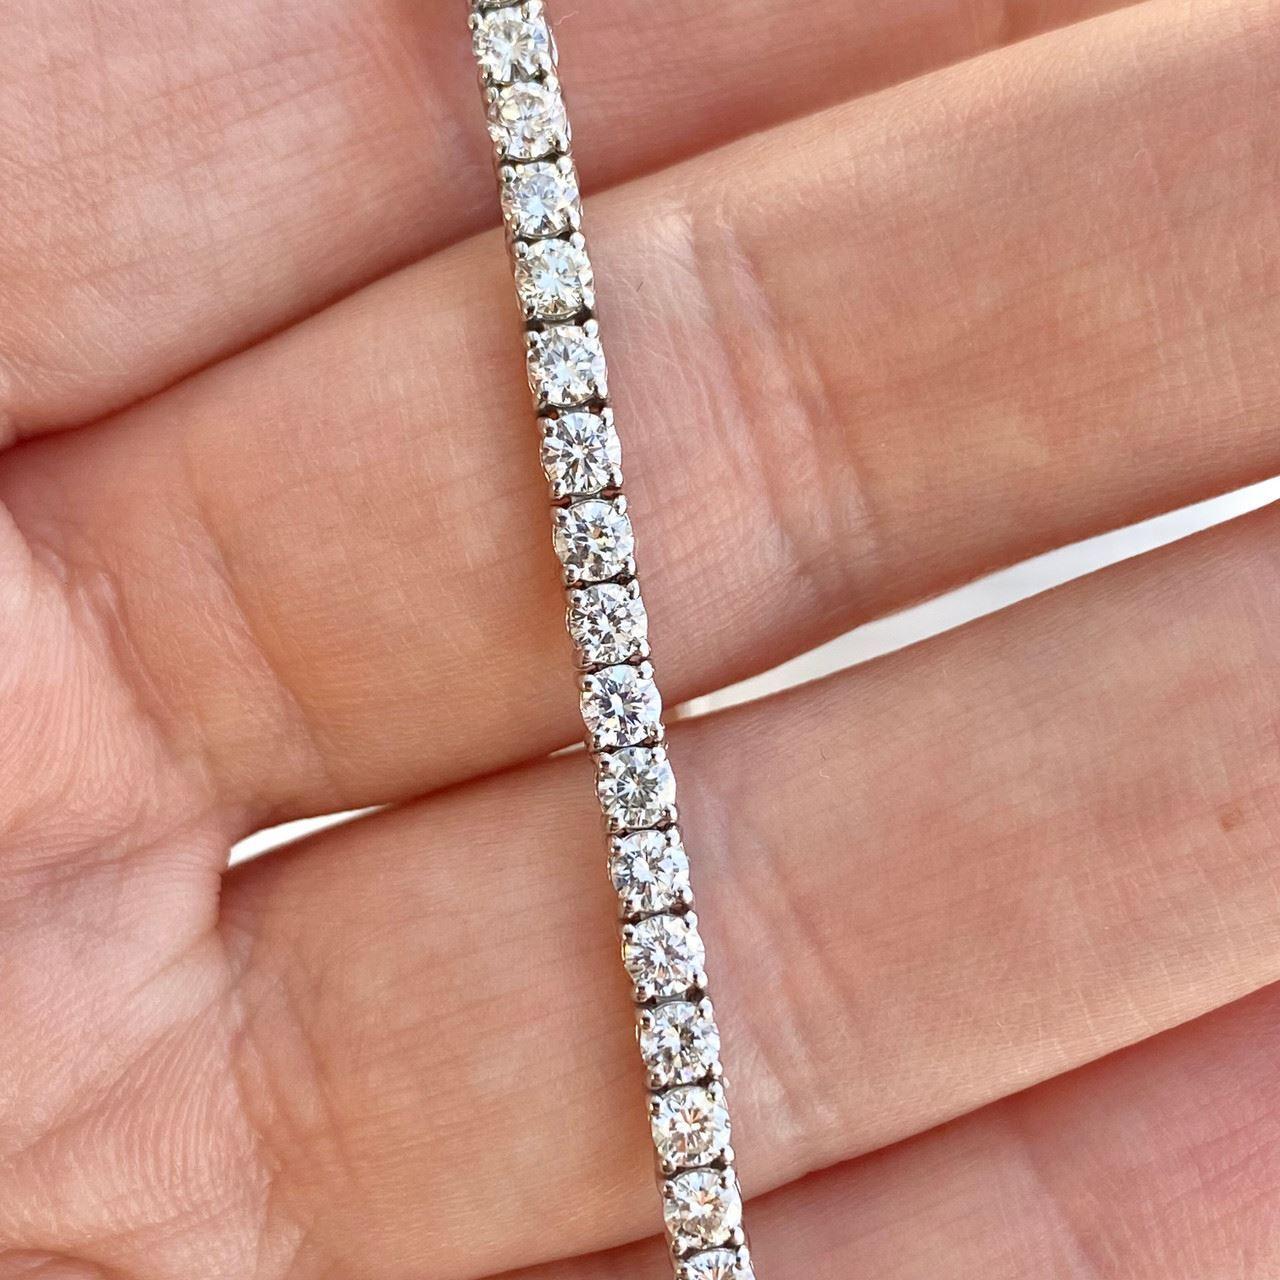 Specifications:
Custom made in Los Angeles, CA
Metal: 18K White Gold
Weight: 8.5 Gr
Main Stone: 3.93ctw Round Diamonds
Color: H
Clarity: VS2-SI1
Size: 7 Inch
Hallmark: ‘750’